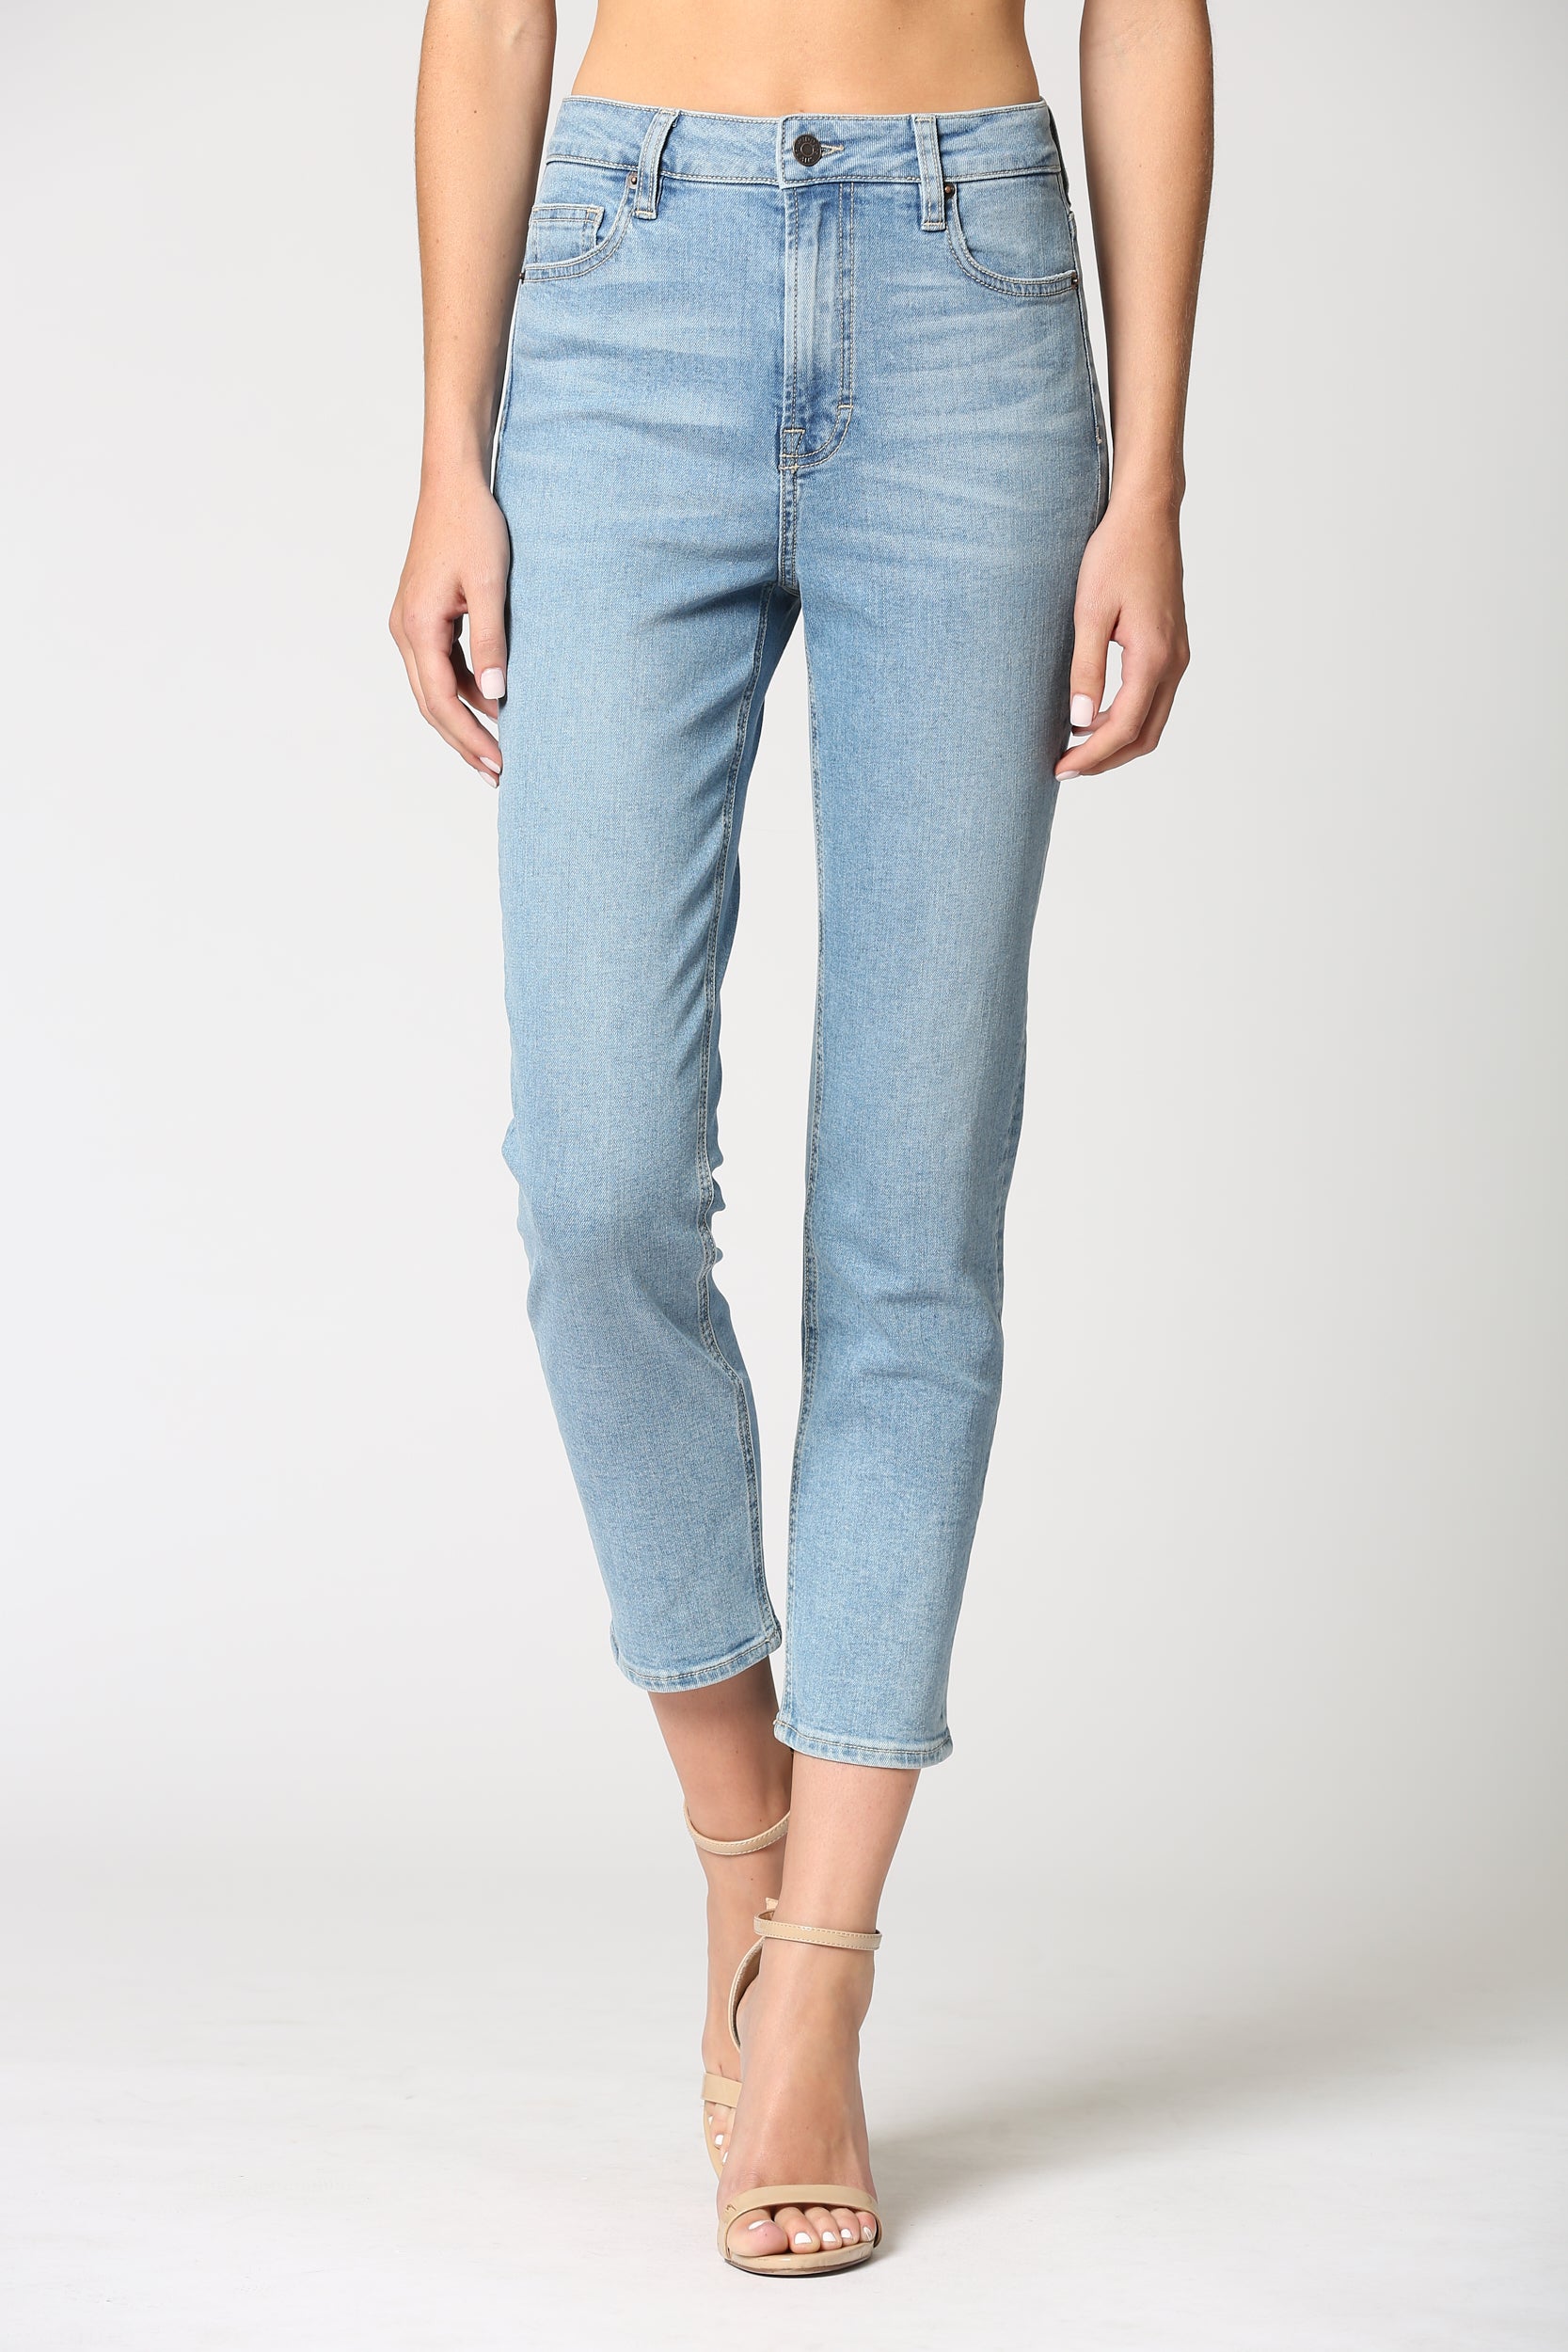 Harley High Rise Jeans - FINAL SALE